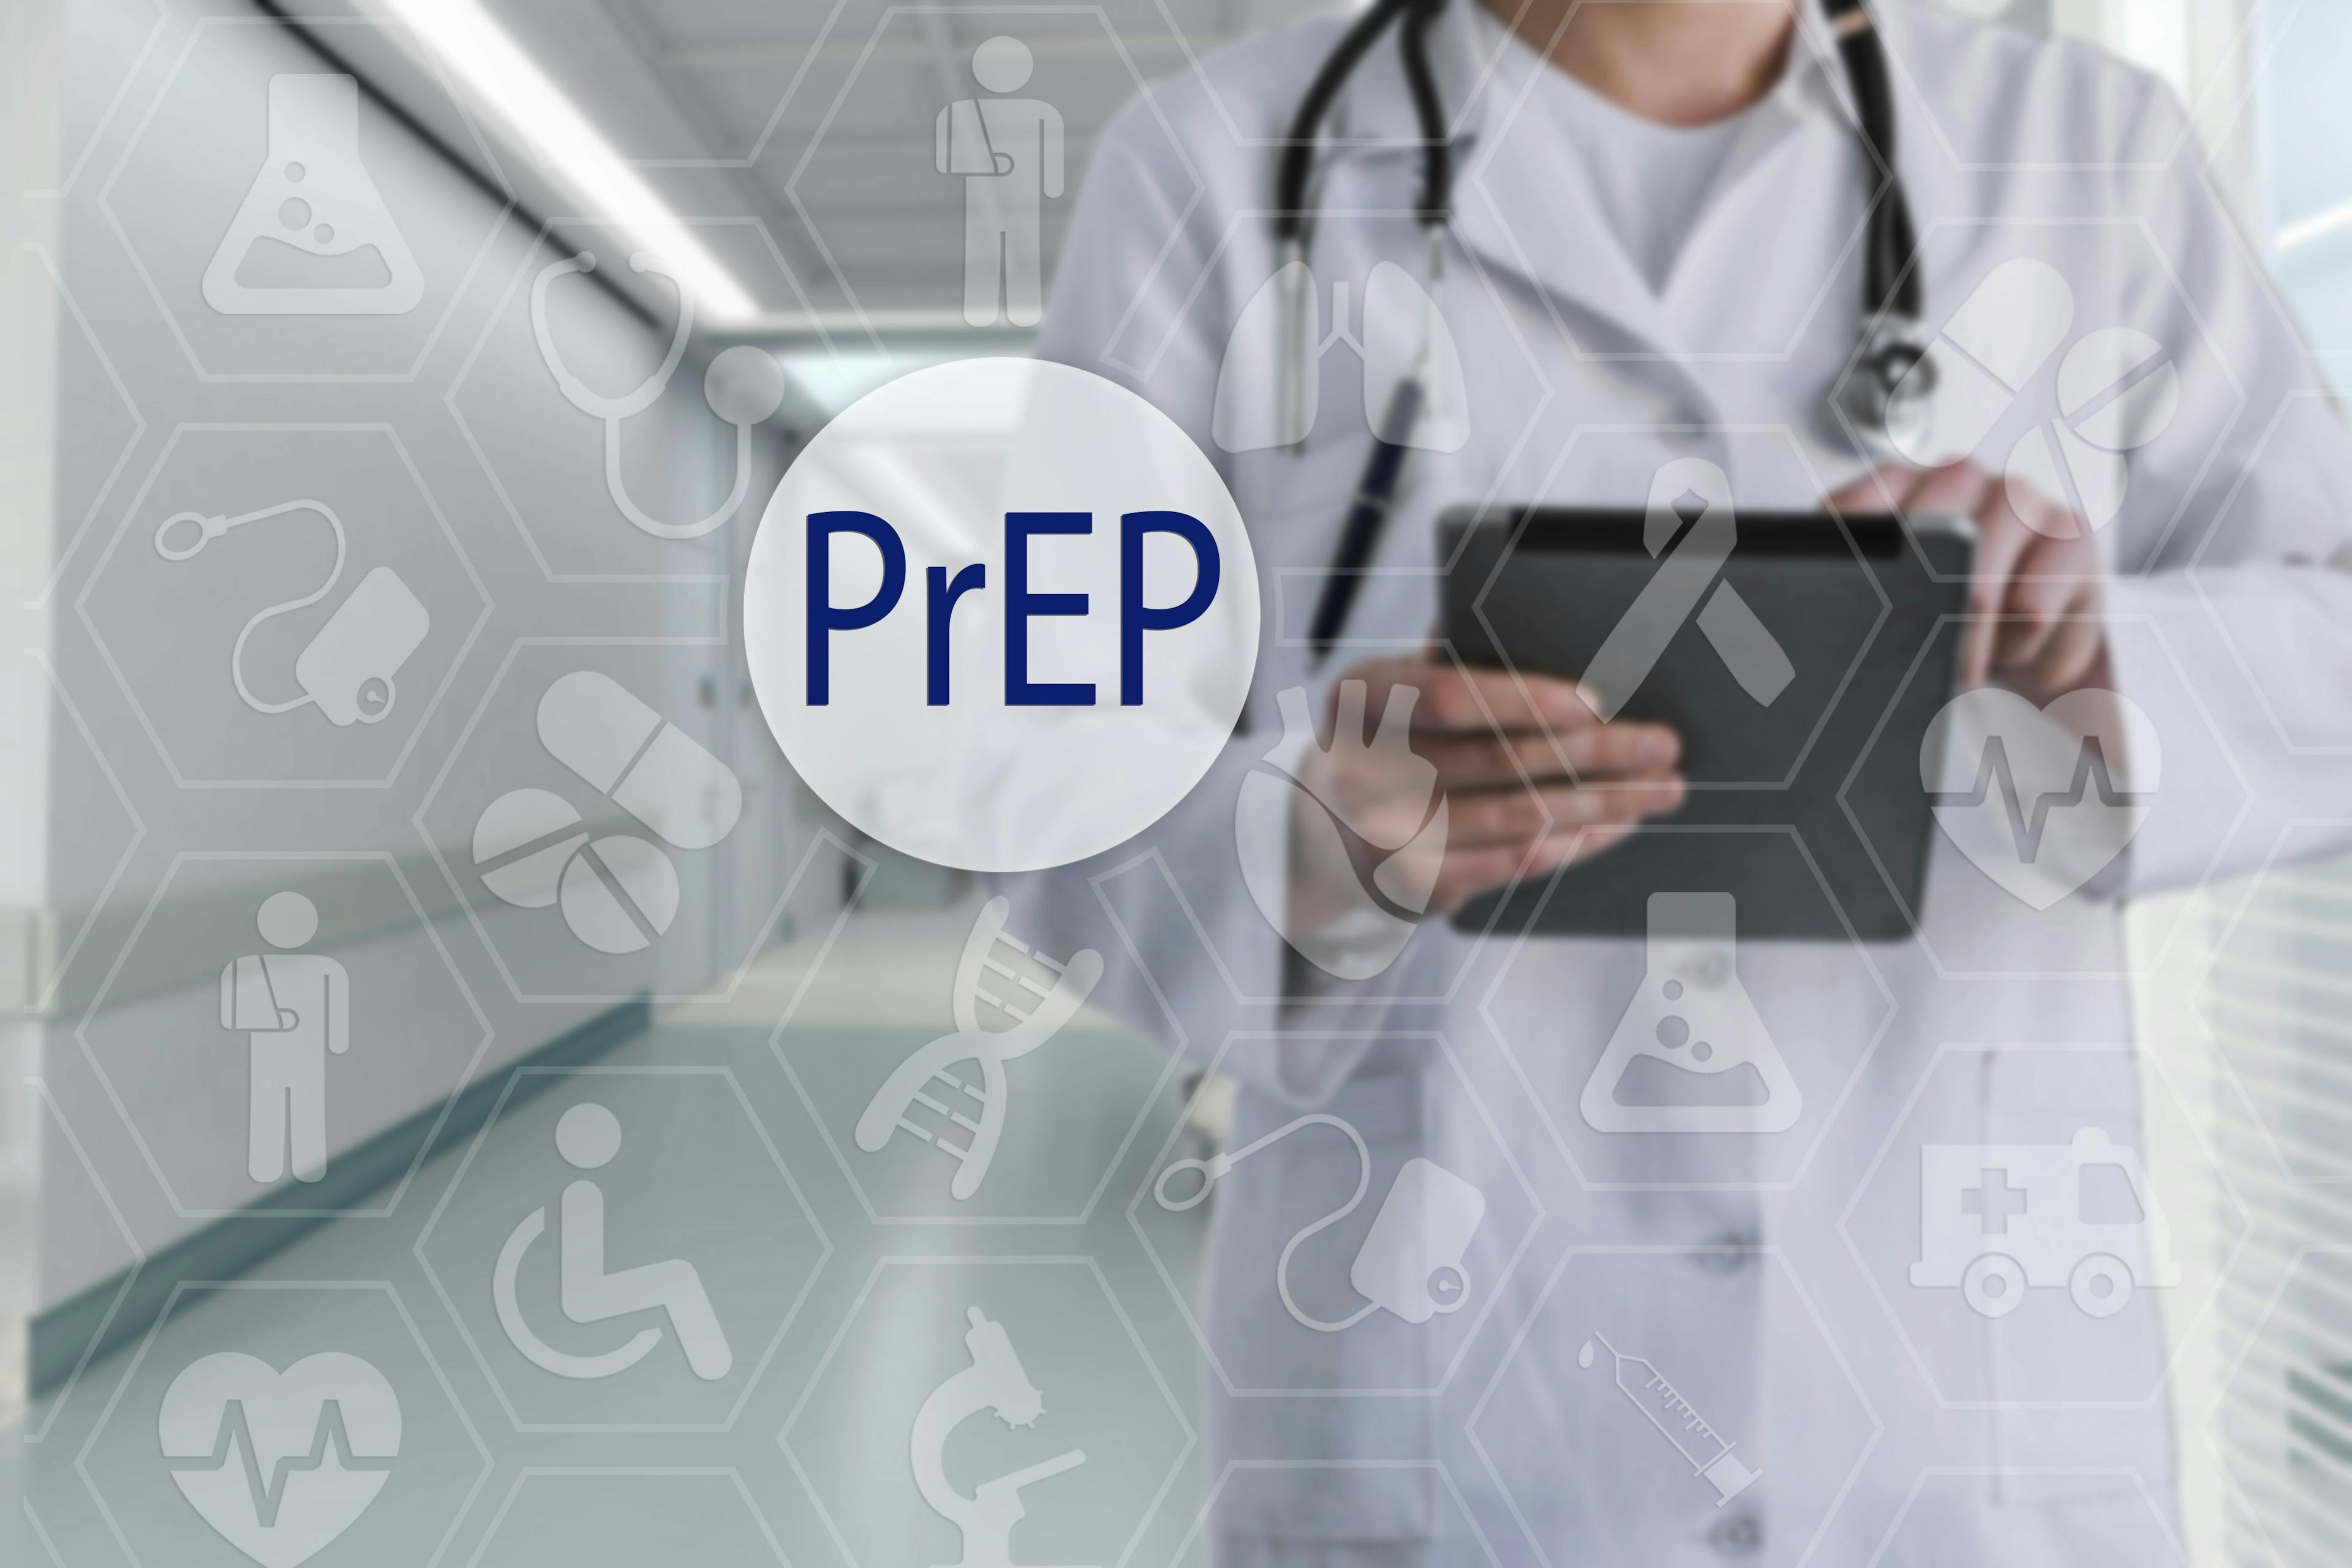 Culturally Tailored Approaches Needed to Improve Access to PrEP for HIV